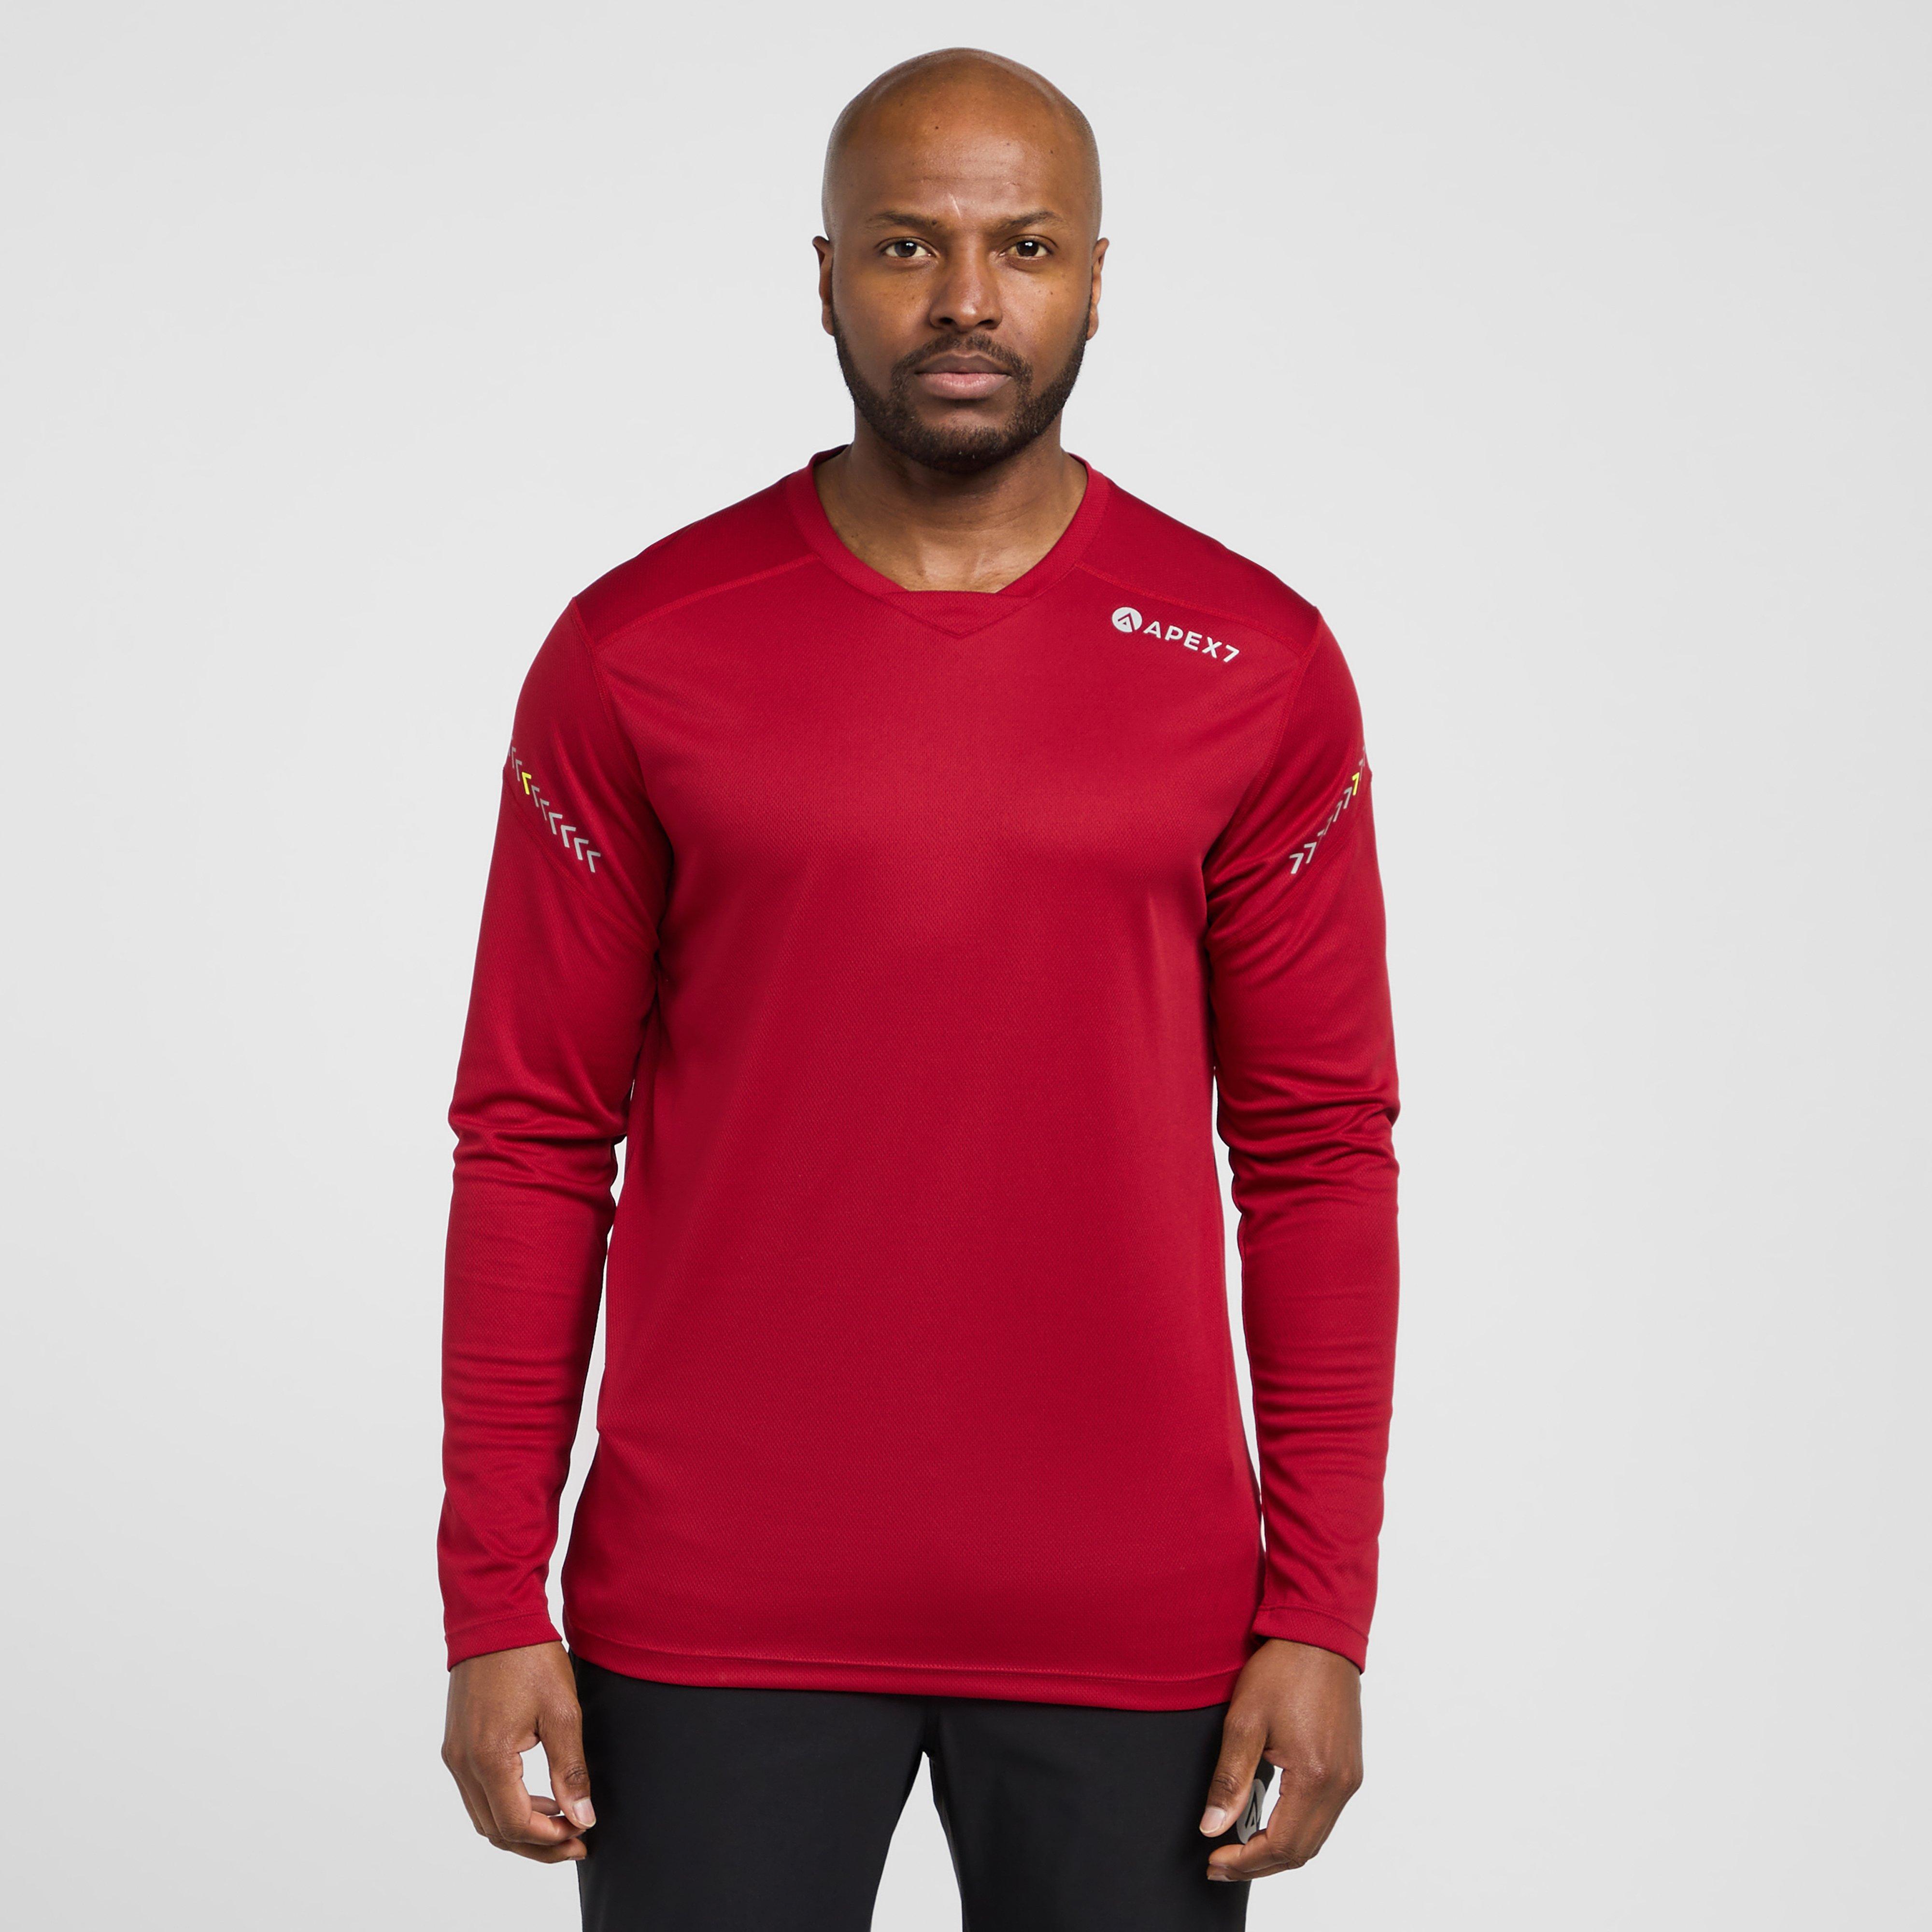 Apex7 Apex7 Lithium Long Sleeve Jersey - Red, Red